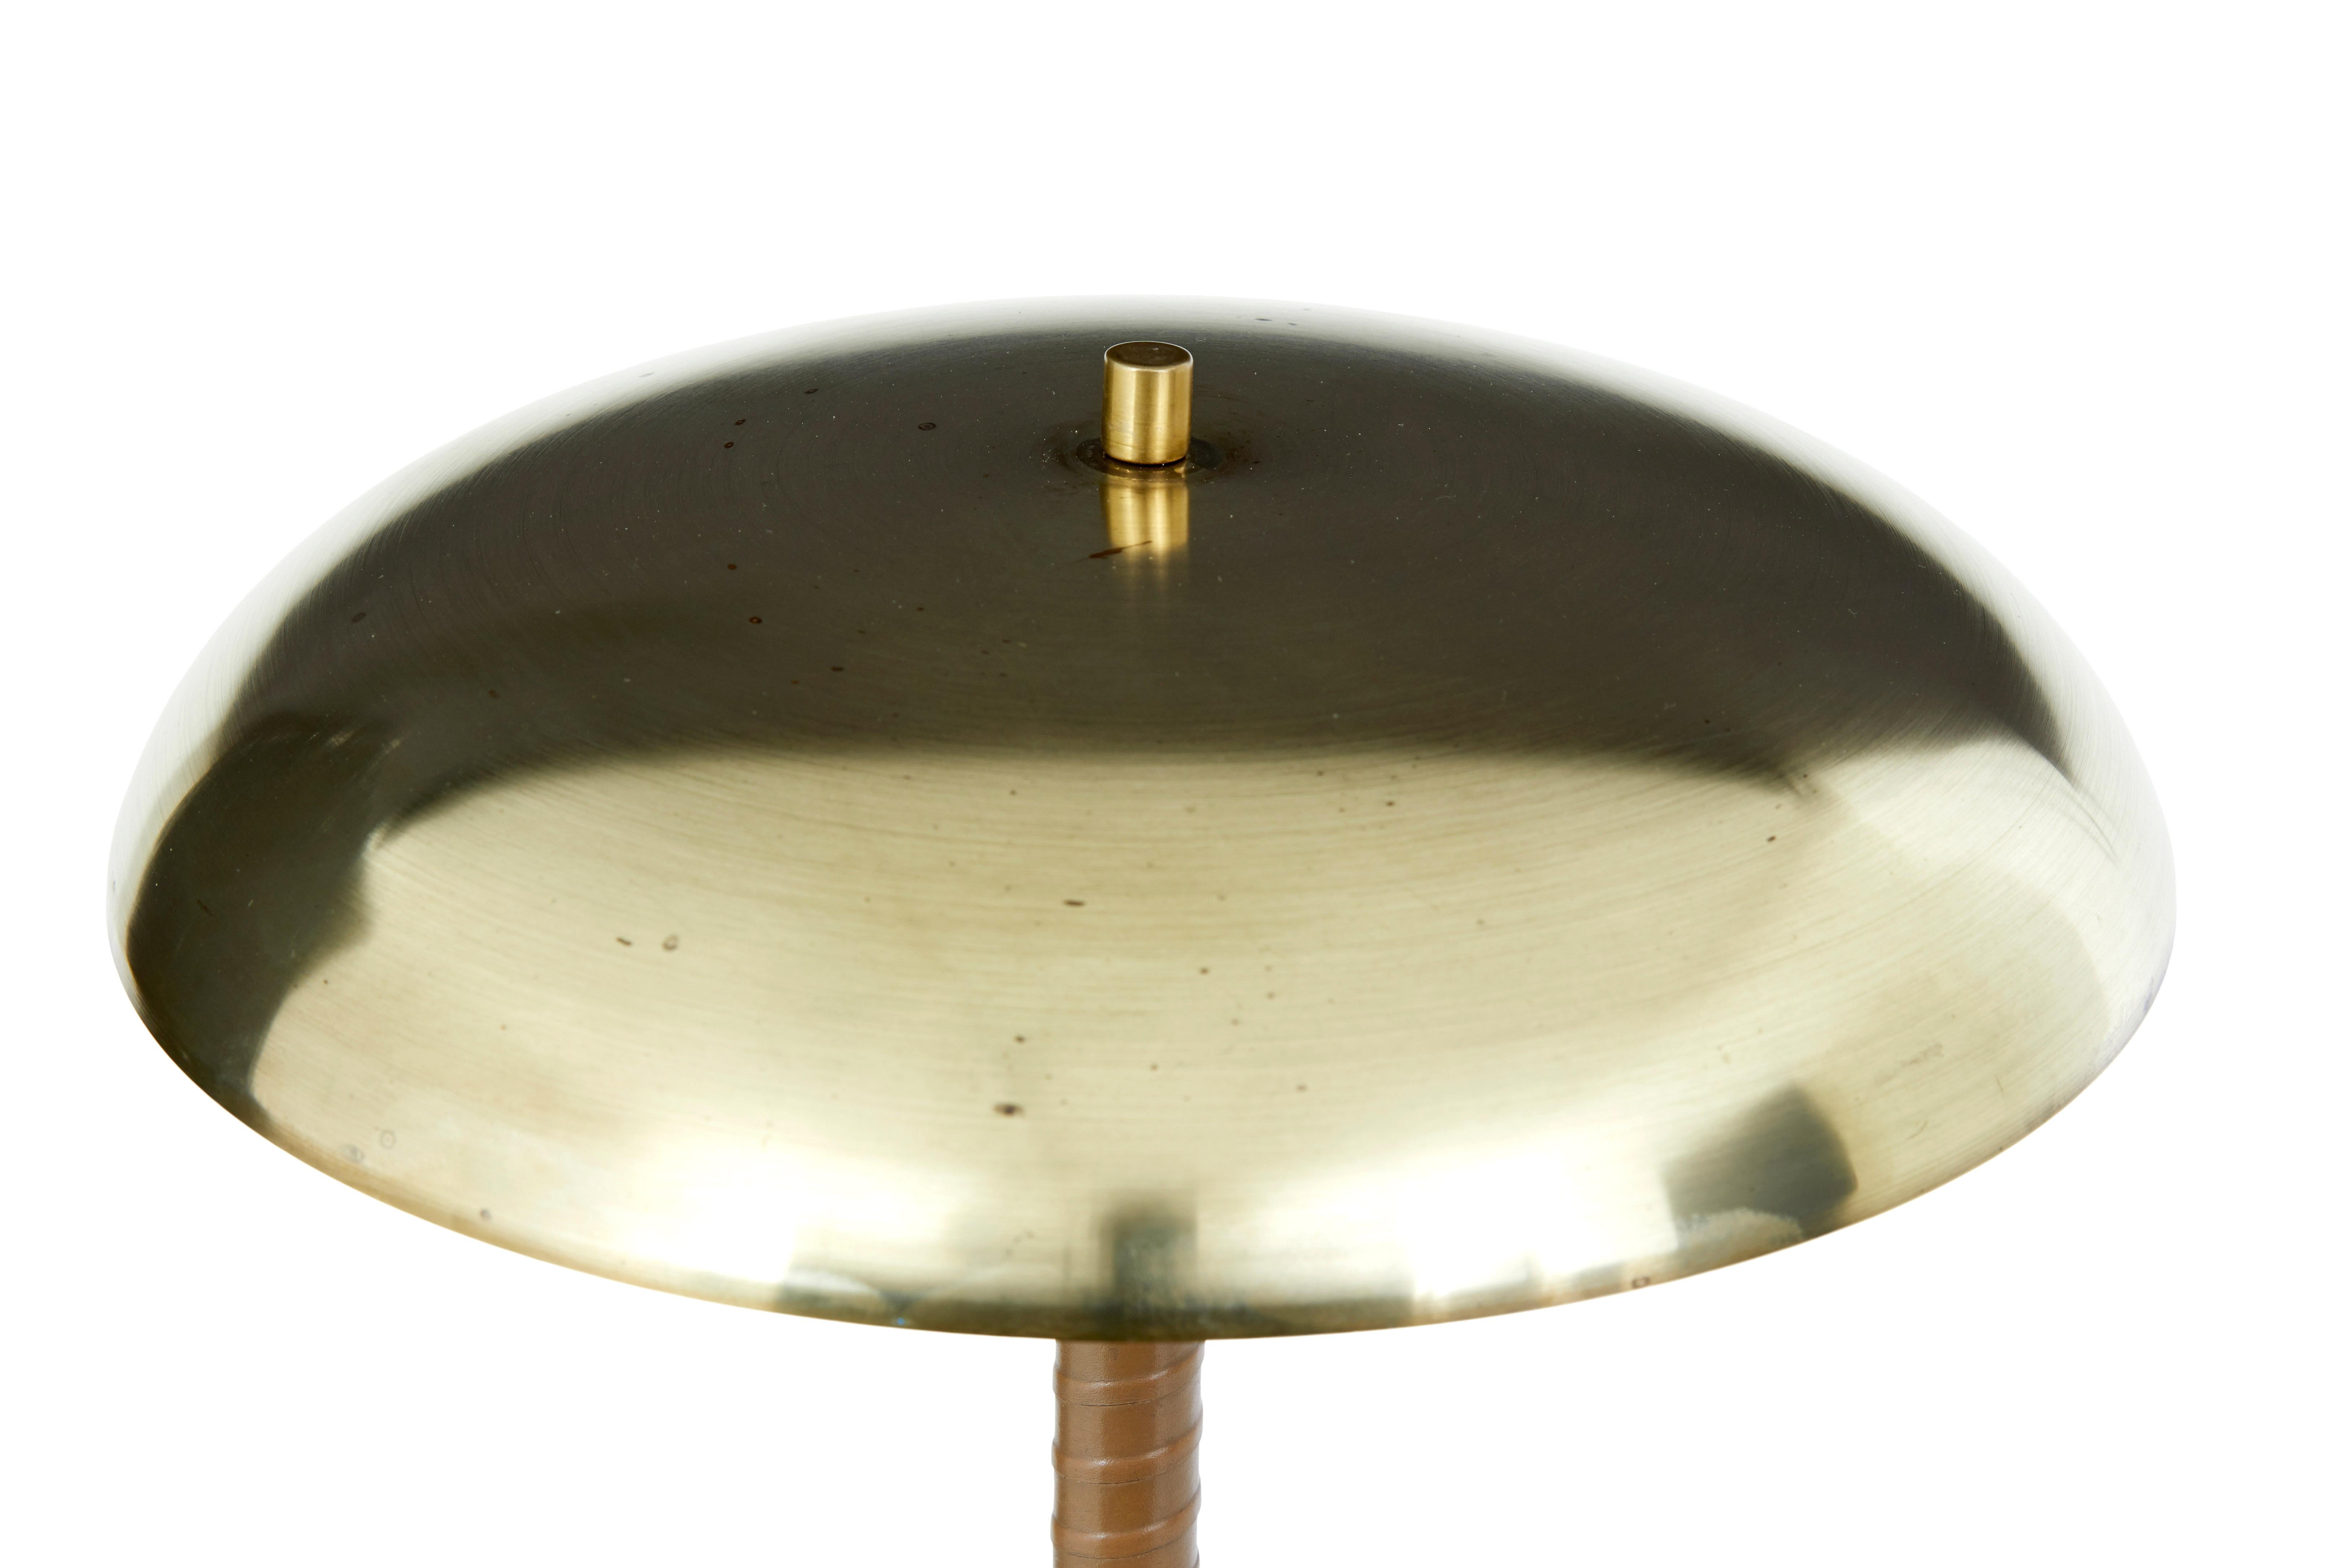 Swedish mid century brass and leather table lamp by borens circa 1960.

Fine quality borens boras desk/table lamp.  Brushed brass symbol top, with 2 bulb holders below, which reflect light down from the white painted underside.  Stands on a tan